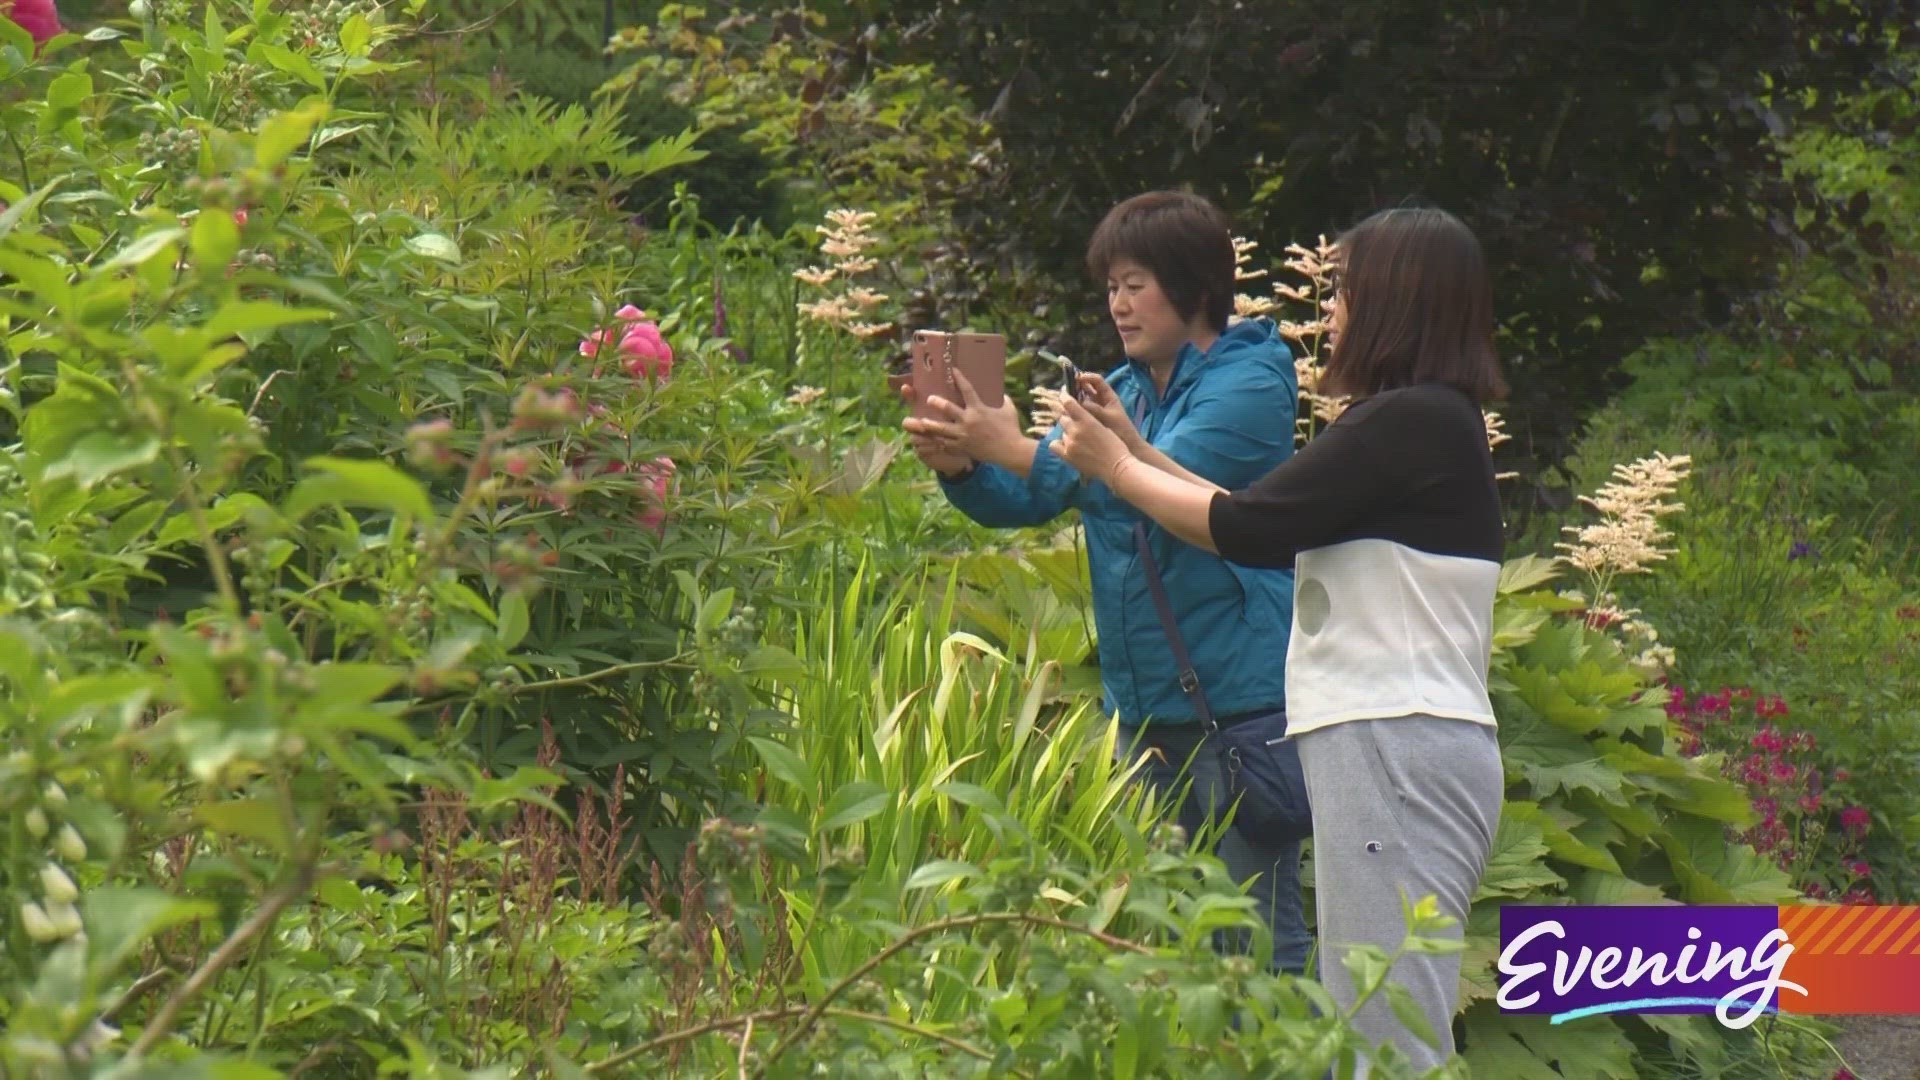 Bellevue Botanical Garden has welcomed hundreds of thousands visitors - for free - for more than 30 years. #k5evening